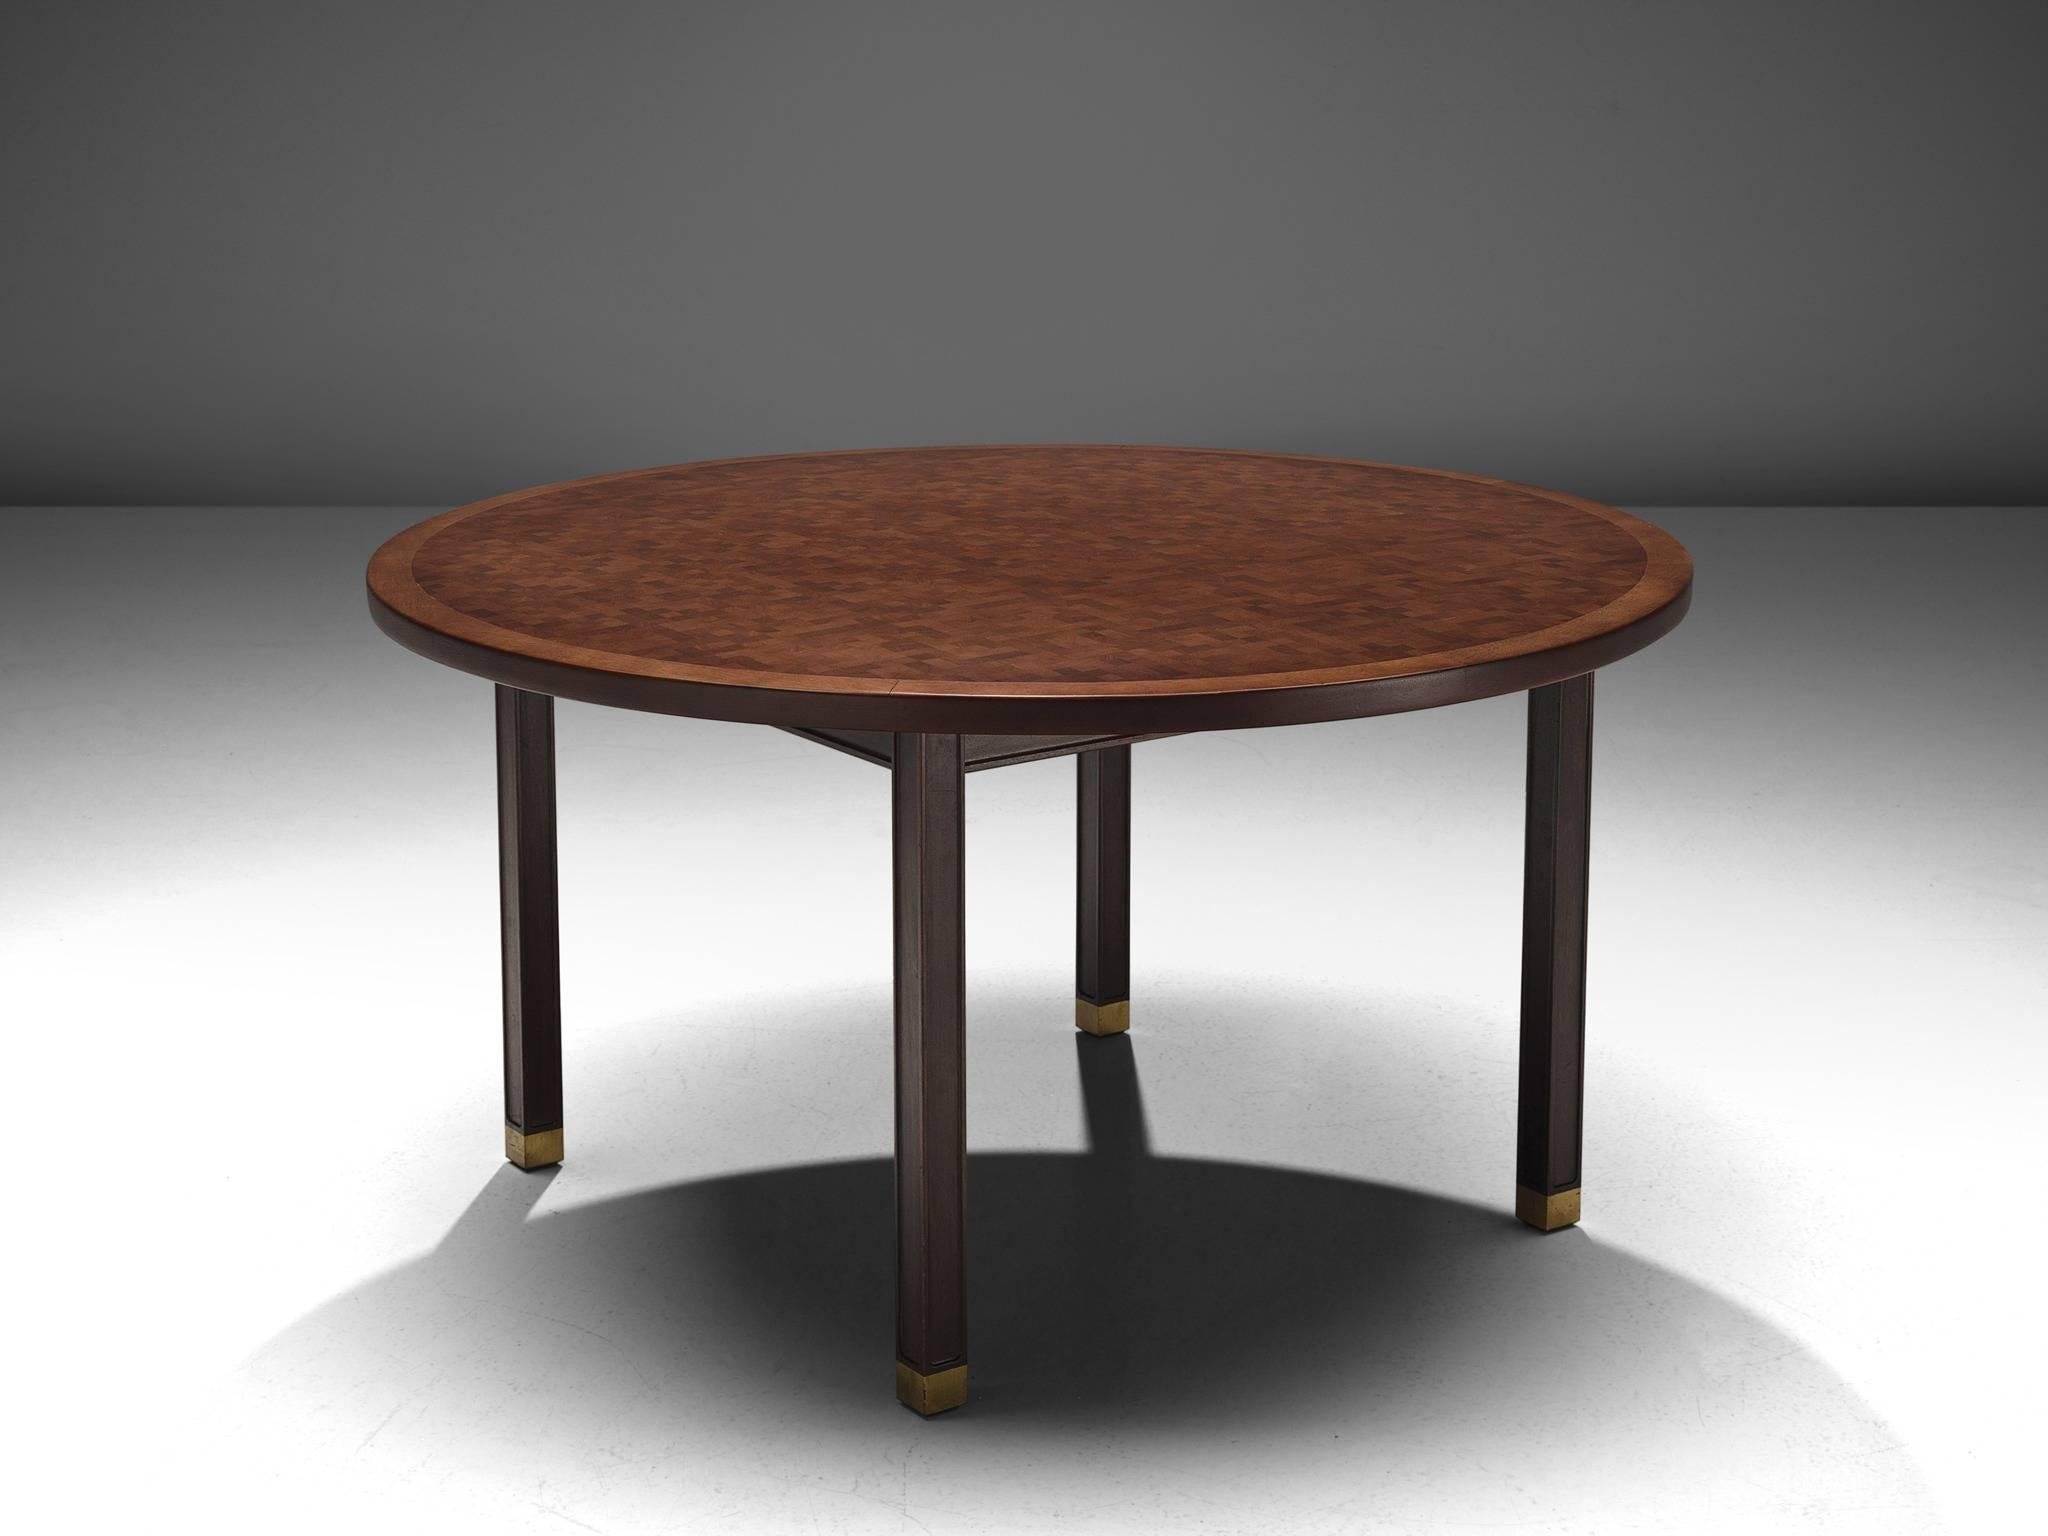 Gorm Lindum, dining table, brass and mahogany, Denmark, circa 1970.

This inlaid centre table by Gorm Lindum has mosaic structured tabletop, that consist of cubical pieces end-grain mahogany wood. These pieces vary both in color and pattern and by